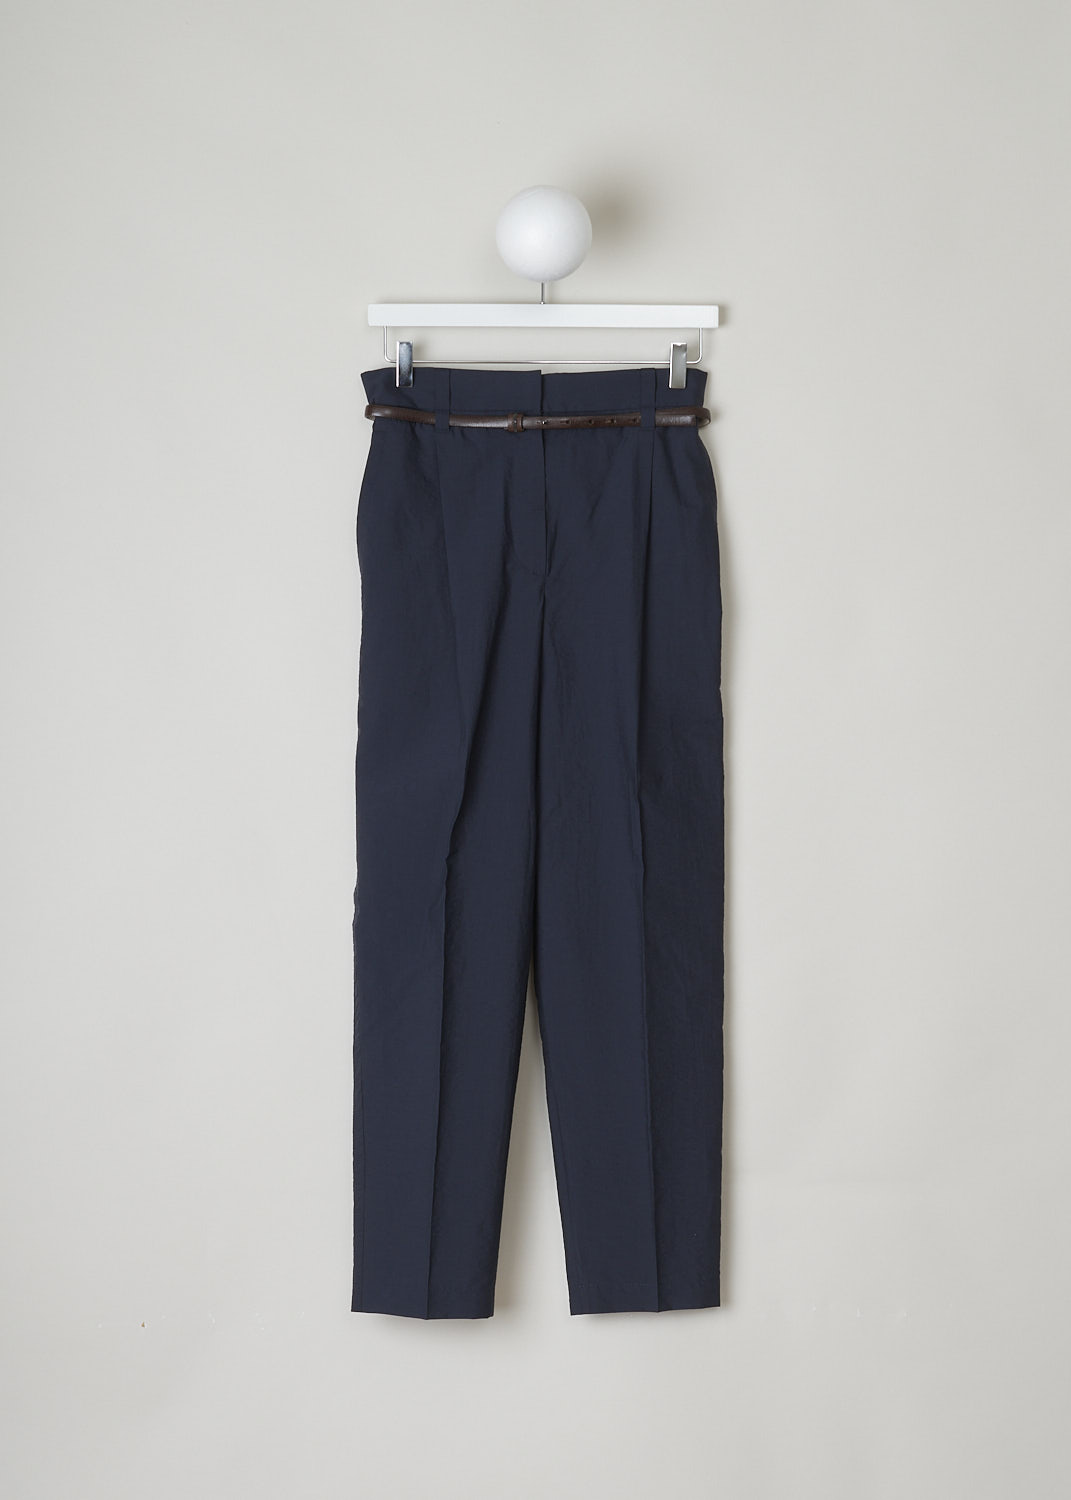 BRUNELLO CUCINELLI, NAVY BLUE PANTS WITH A BROWN LEATHER BELT, M0F79P7216_C7186, Blue, Front, These navy blue pants are made of a breathable cotton and feature a concealed snap and zip closure. These pants come with a brown leather belt with a subtle Monilli beaded detail. The tapered pant legs a centre creases. In the front, slant pockets can be found. In the back, these pants have welt pockets.
